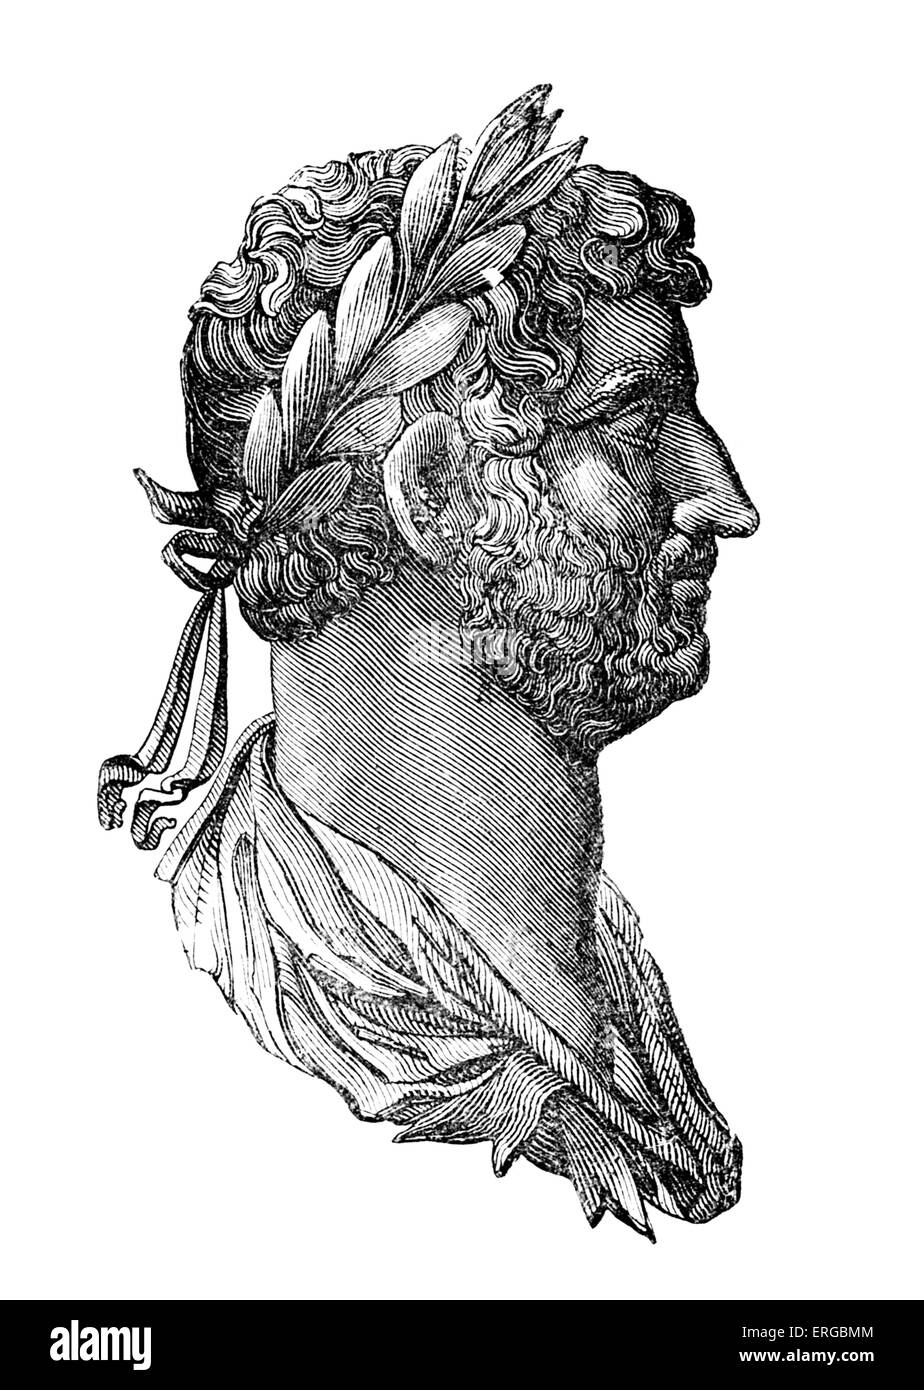 Hadrian - Roman Emperor. Taken from a copper coin in the British Museum. Roman Emperor from 117 to 138, b. January 76 - d. July Stock Photo